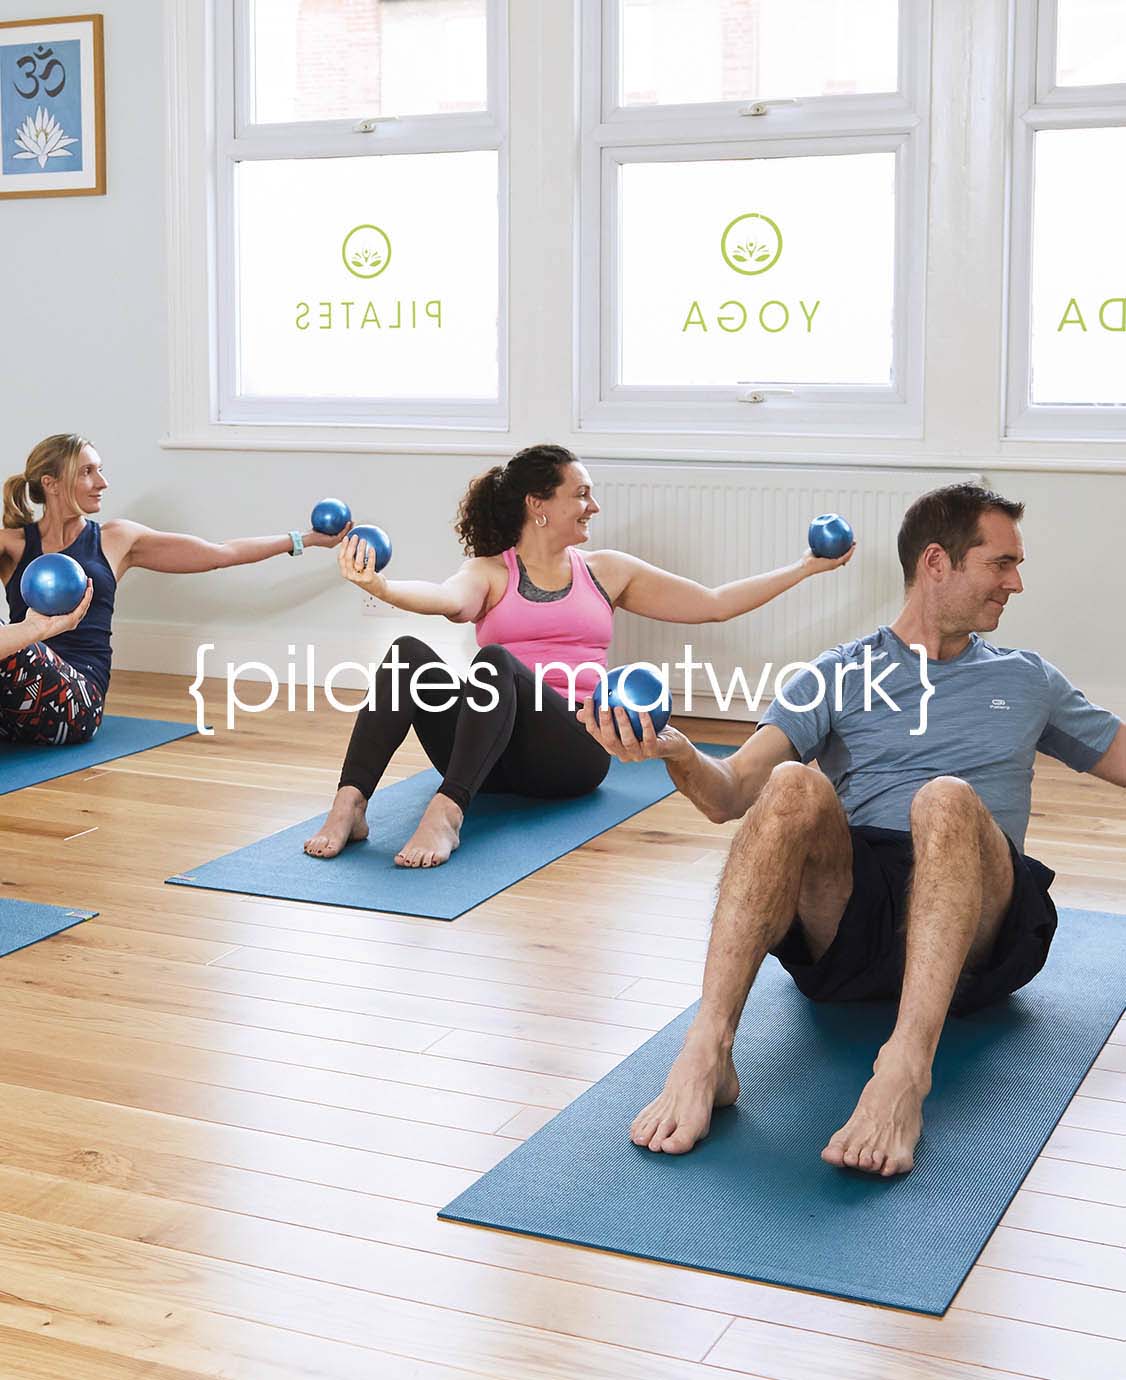 Pilates Matwork at Lotus health and fitness